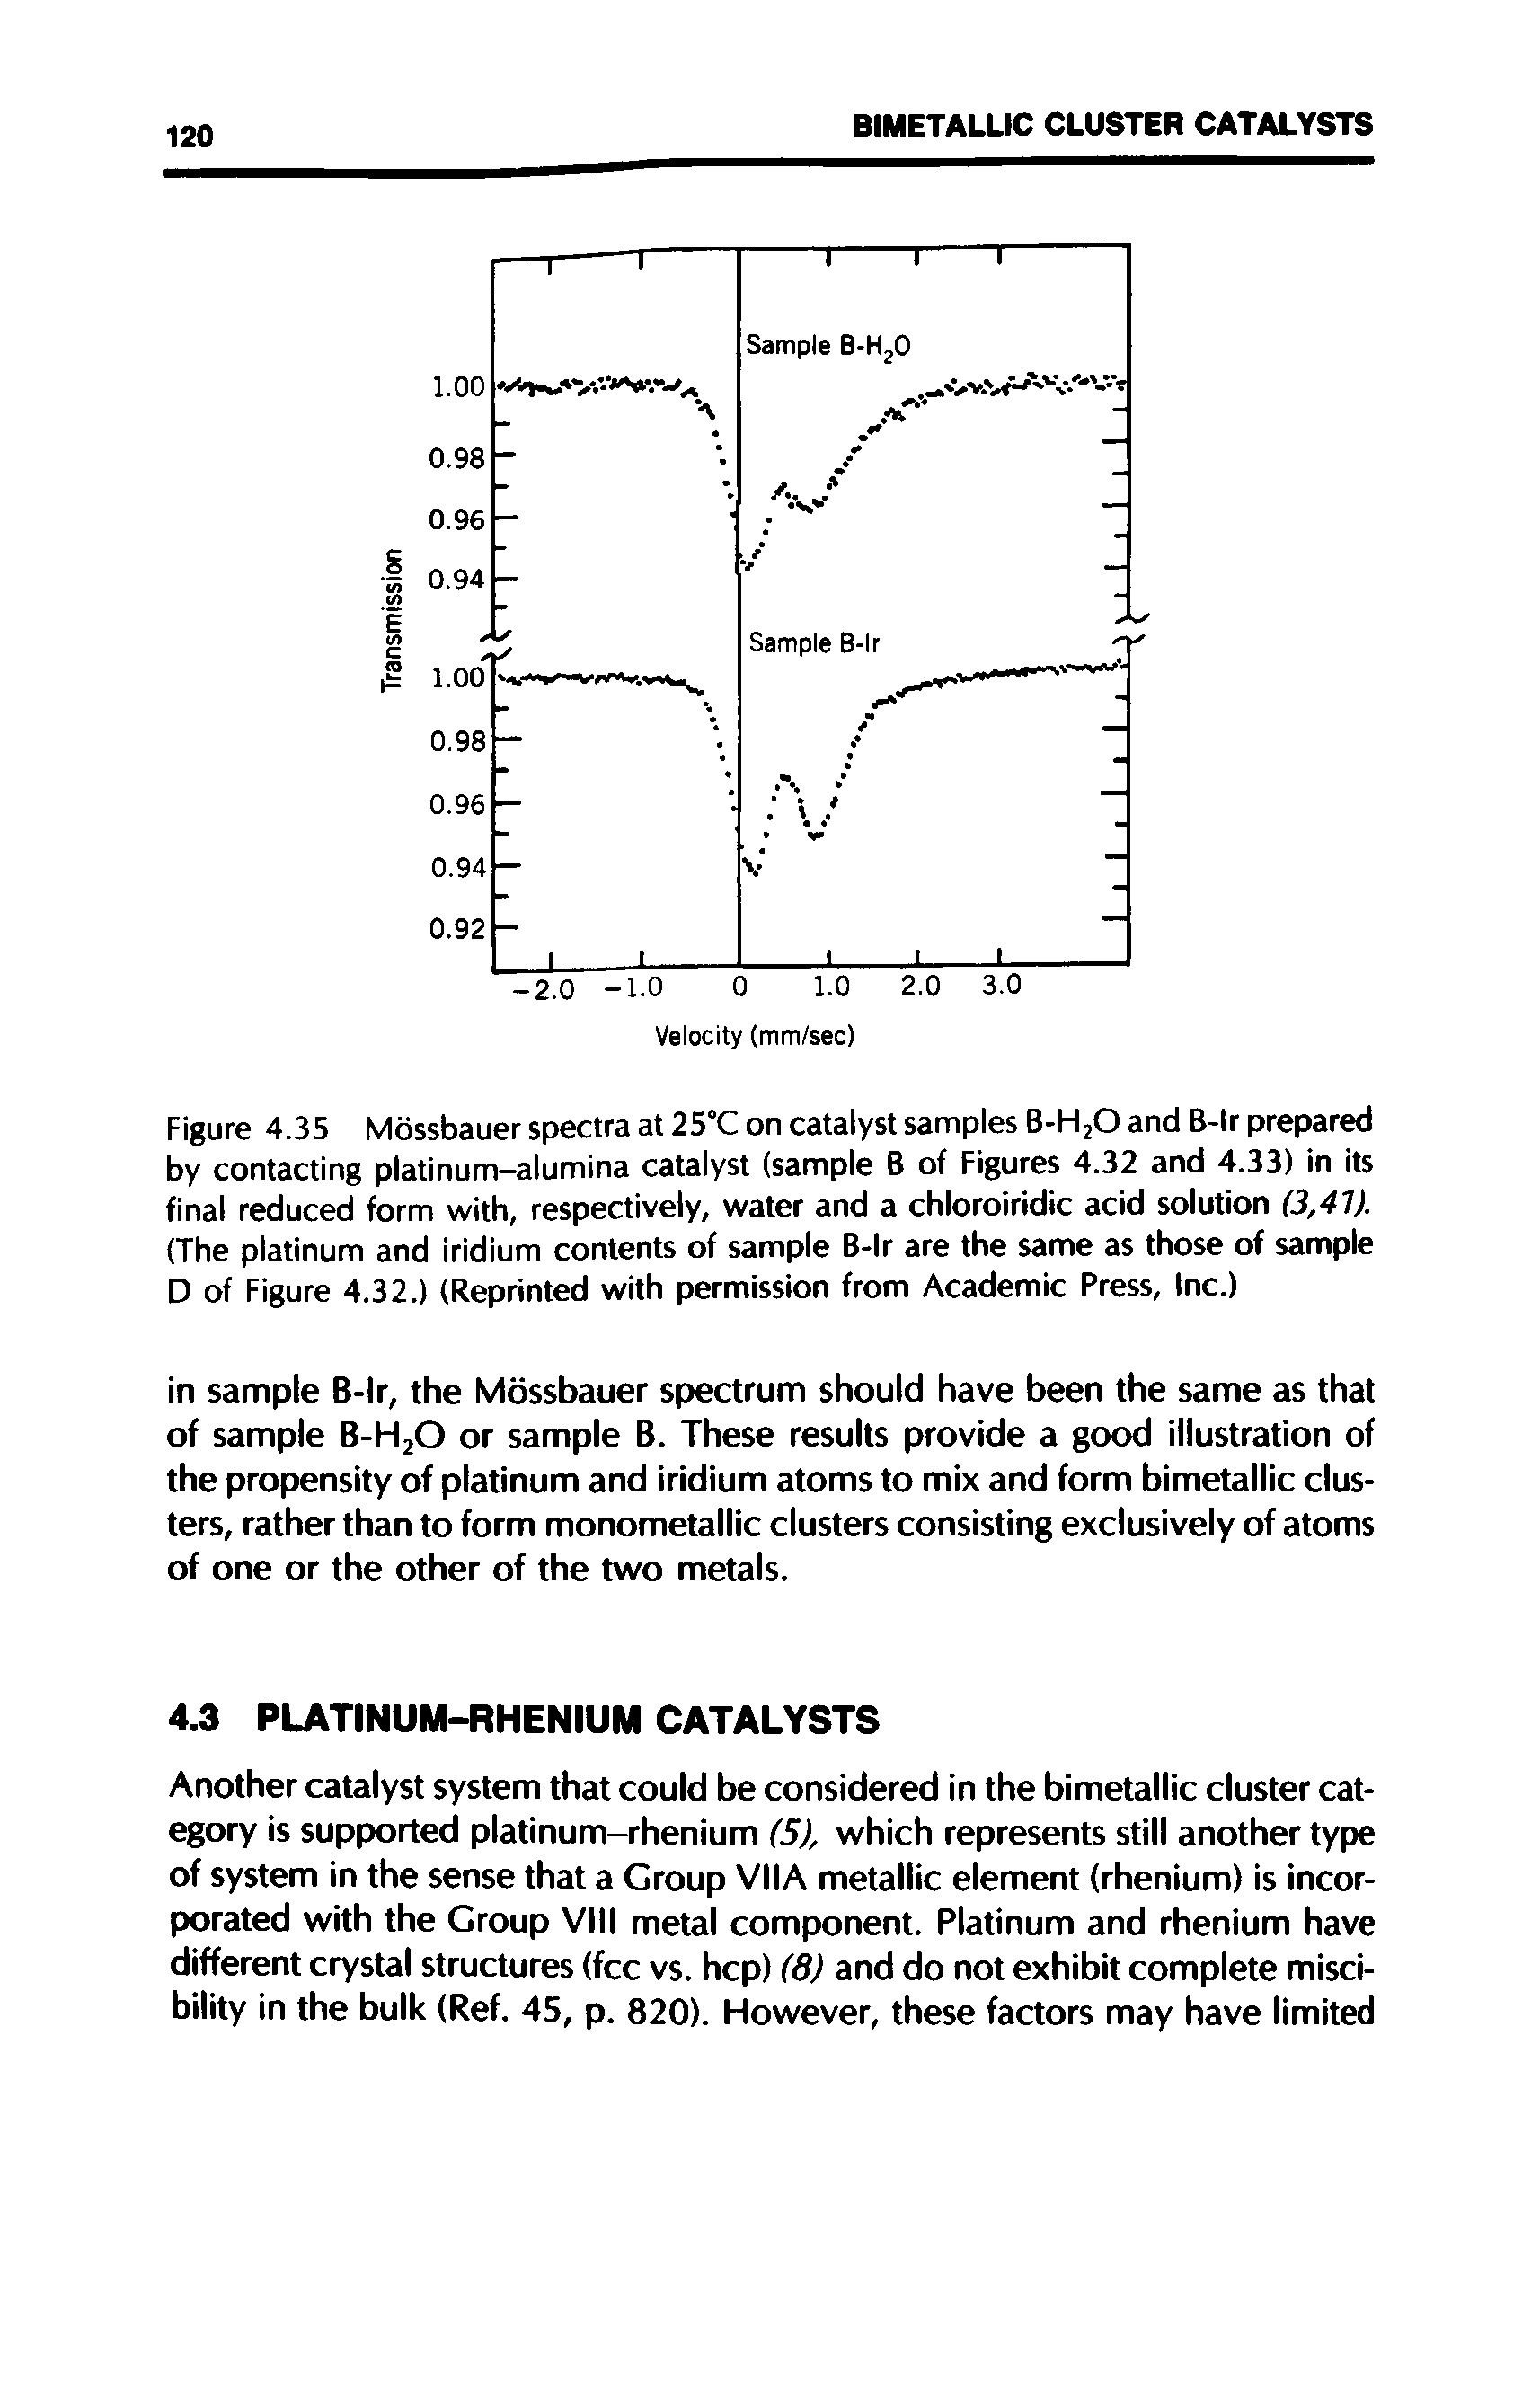 Figure 4.35 Mossbauer spectra at 25°C on catalyst samples B-H20 and B-lr prepared by contacting platinum-alumina catalyst (sample B of Figures 4.32 and 4.33) in its final reduced form with, respectively, water and a chloroiridic acid solution (3,41). (The platinum and iridium contents of sample B-lr are the same as those of sample D of Figure 4.32.) (Reprinted with permission from Academic Press, Inc.)...